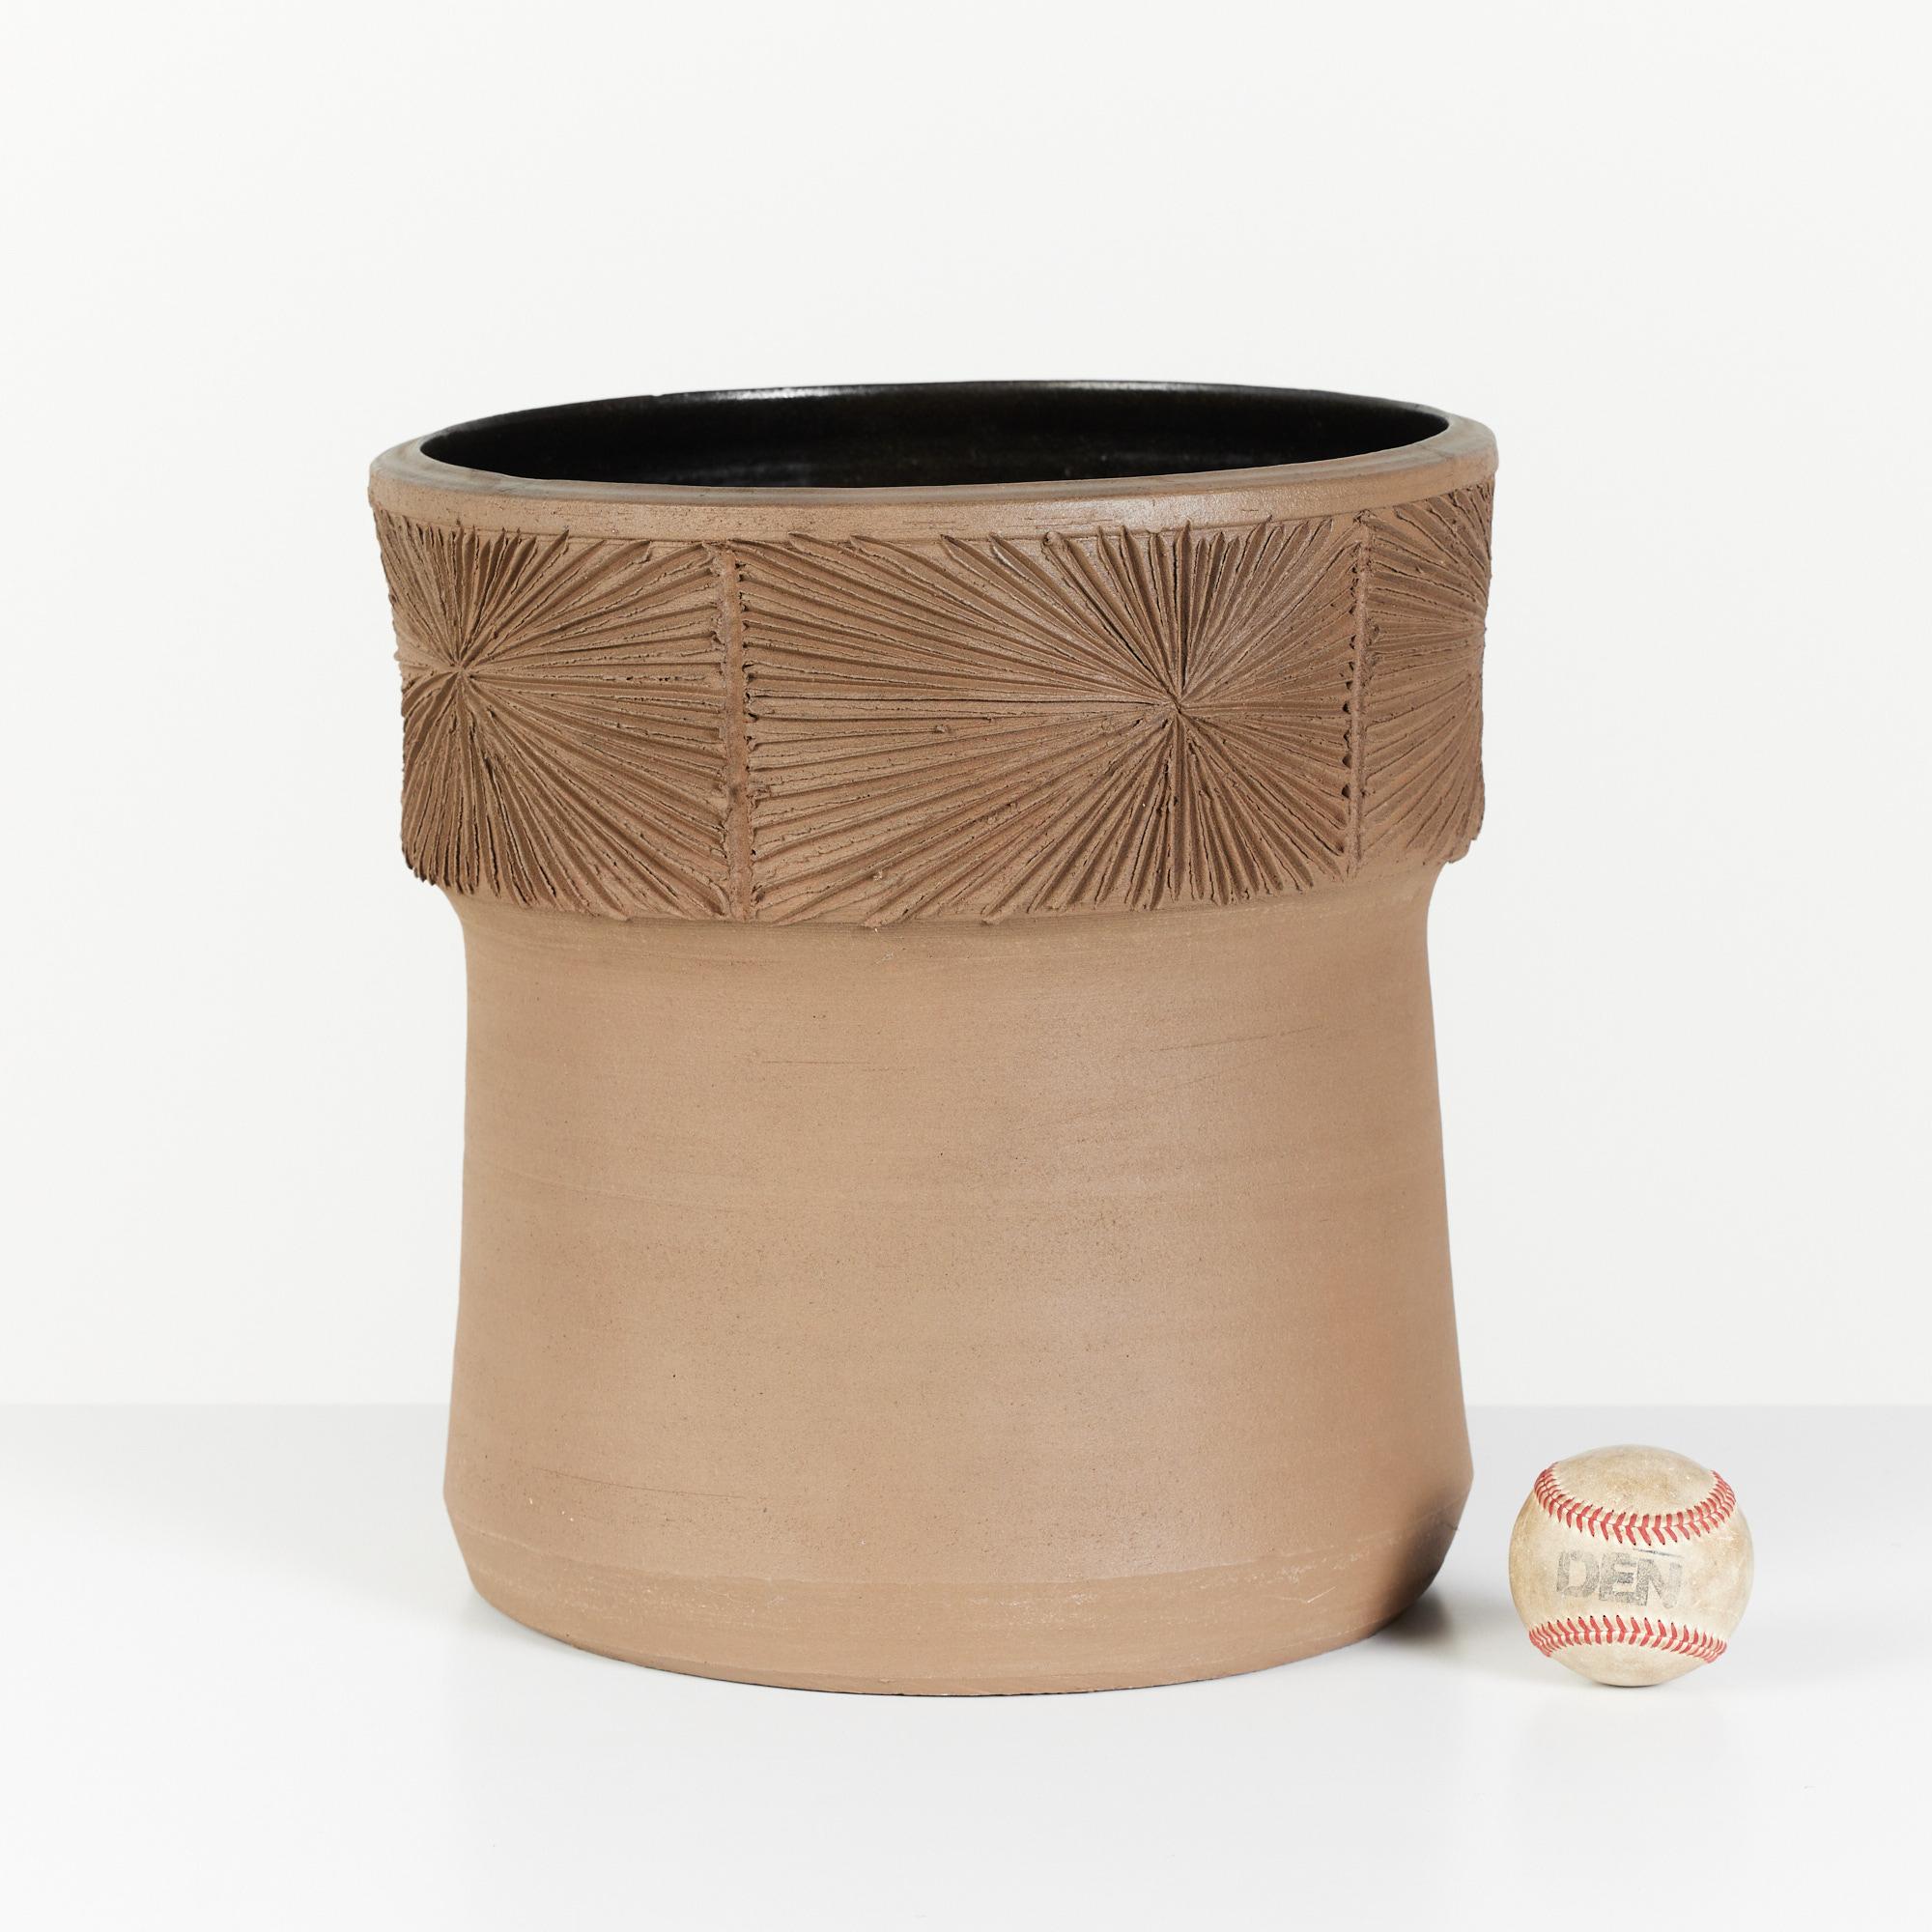 This hand thrown stoneware planter, circa 1970s, USA, is a result of the collaboration between David Cressey & Robert Maxwell to create the line Earthgender. This hand thrown planter features a hand incised 